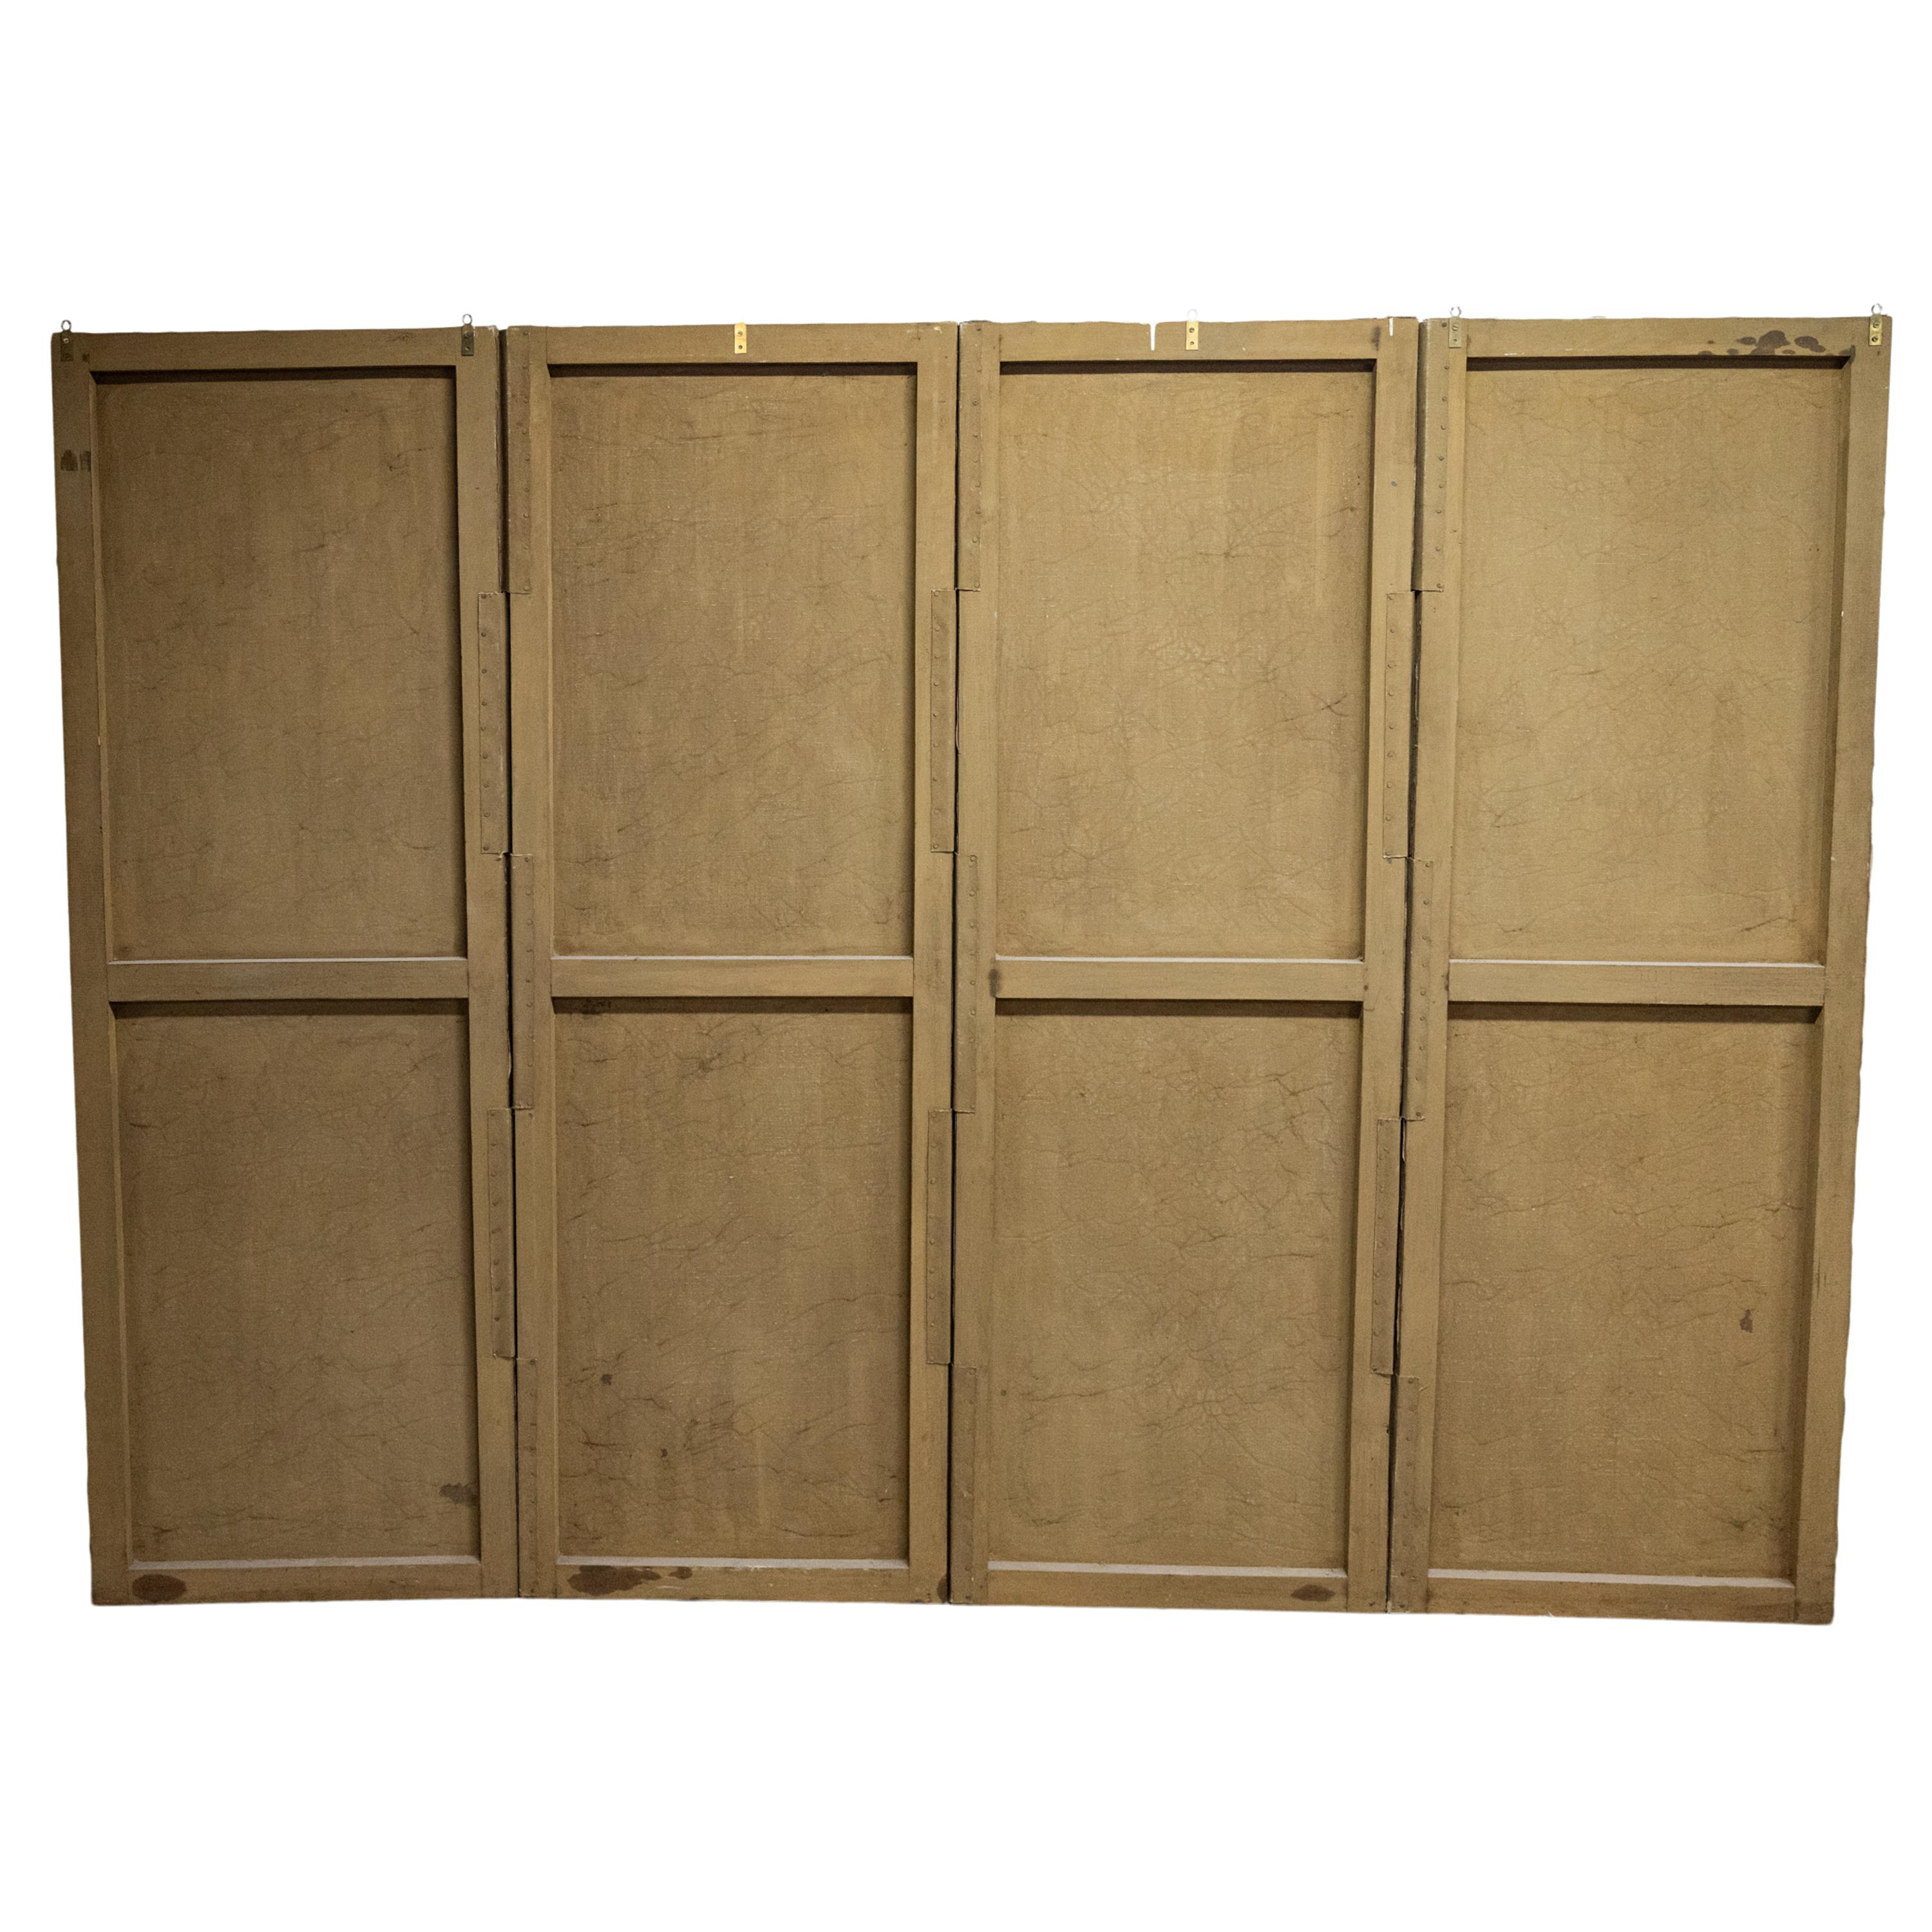 Antique Italian Oil Canvas Painted Neoclassical 4 fold Screen Room Divider 1860 For Sale 14